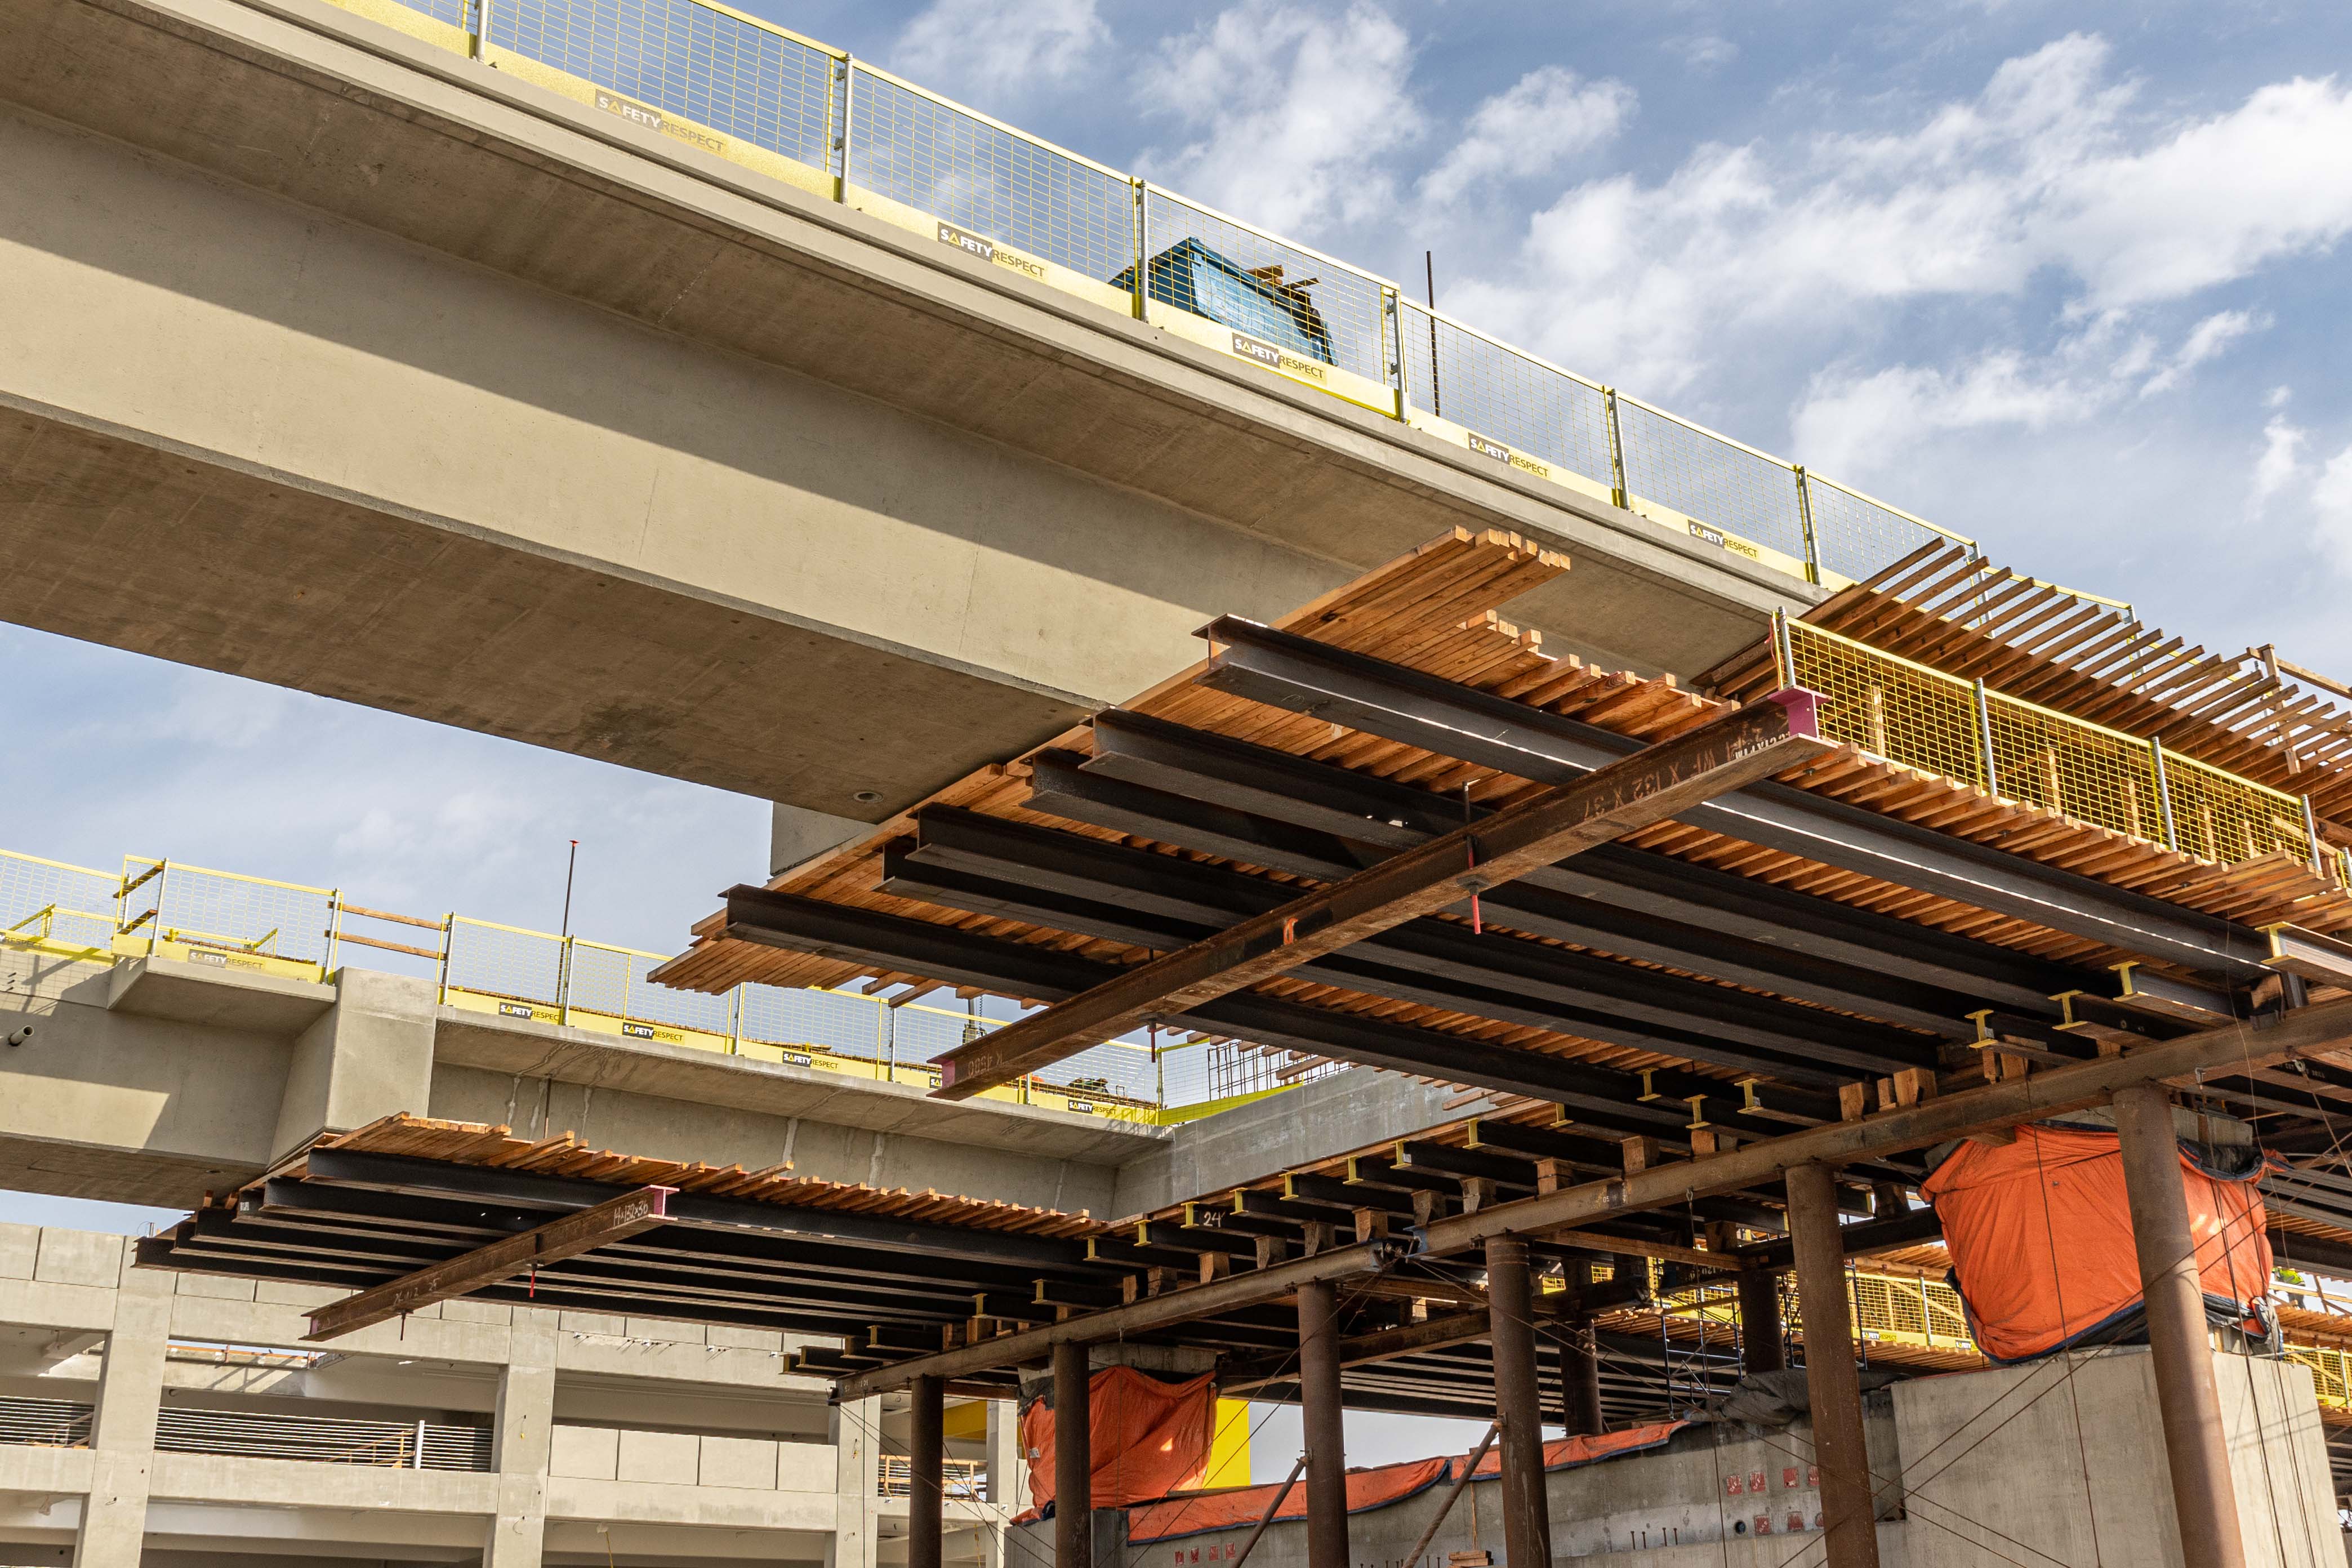 As segments of the guideway superstructure reach prescribed strength, the falsework supporting that segment is disassembled and used at other locations.